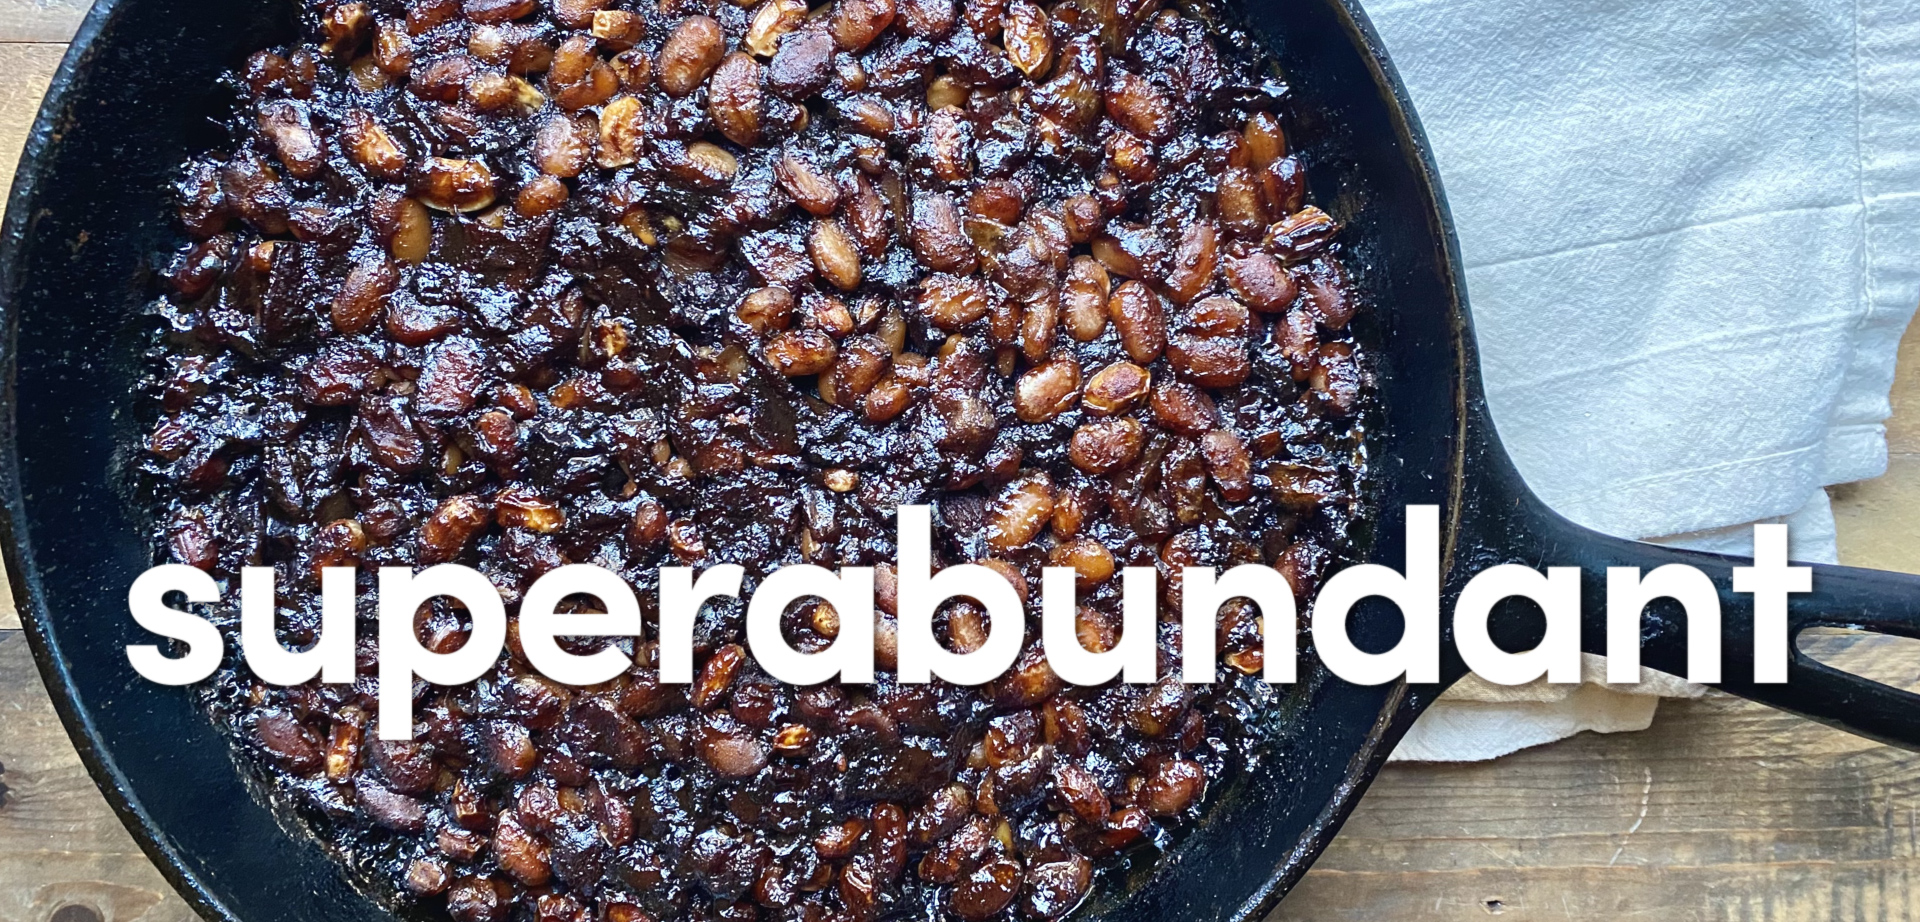 Blackberry baked beans in a cast iron pan.